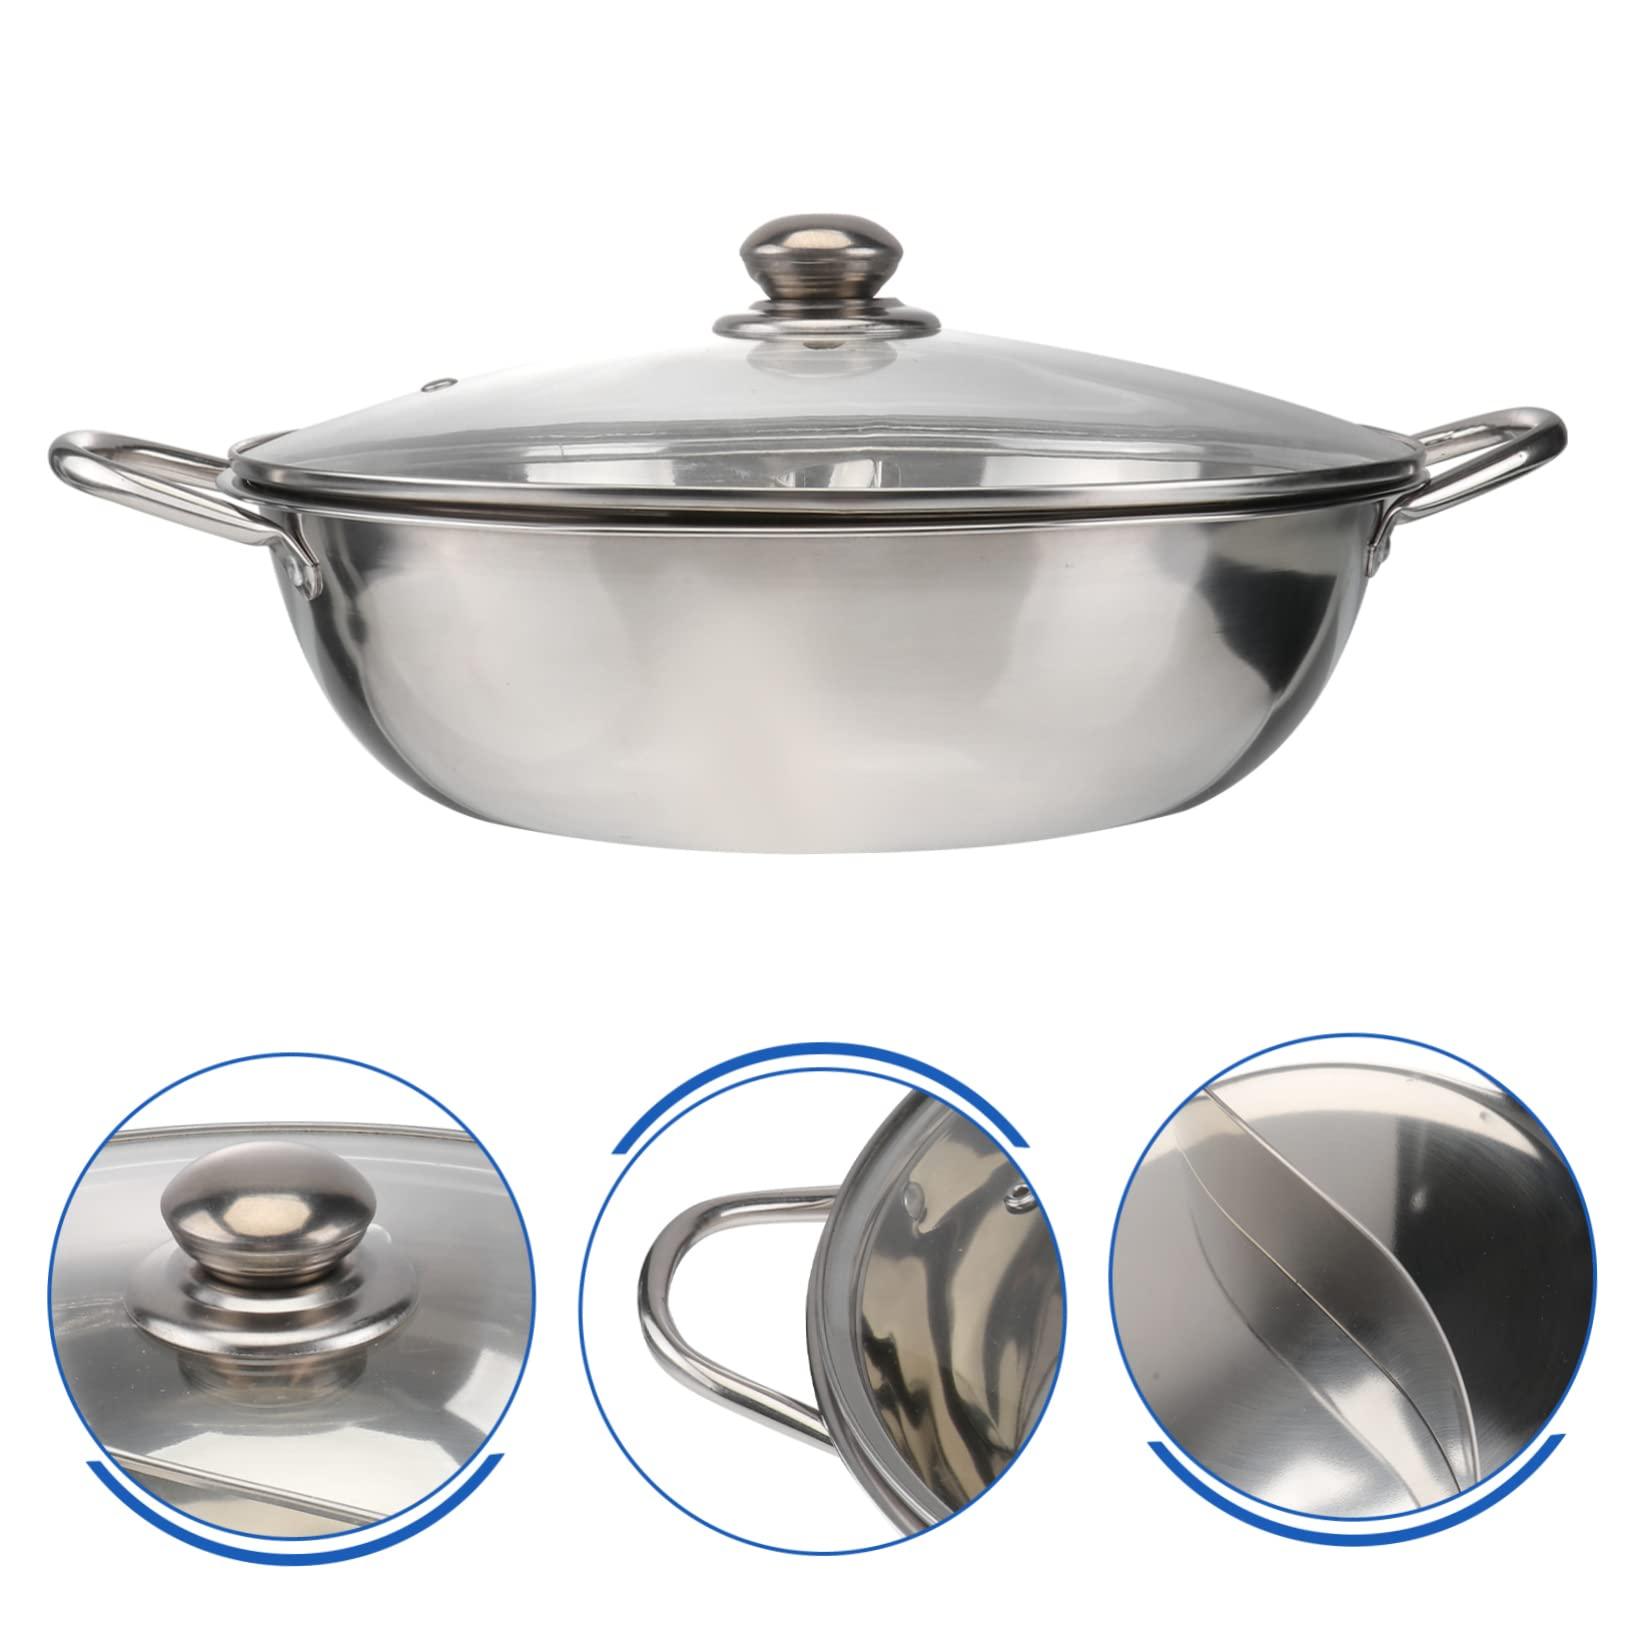 MARMERDO Stainless Steel Hot Pot Mandarin Double Flavor Pot Stainless Steel Everyday Pan Induction Hot Pot Skillet with Lid Stockpot Saucepan Shabu Shabu Pot Divided China Japanese-style - CookCave